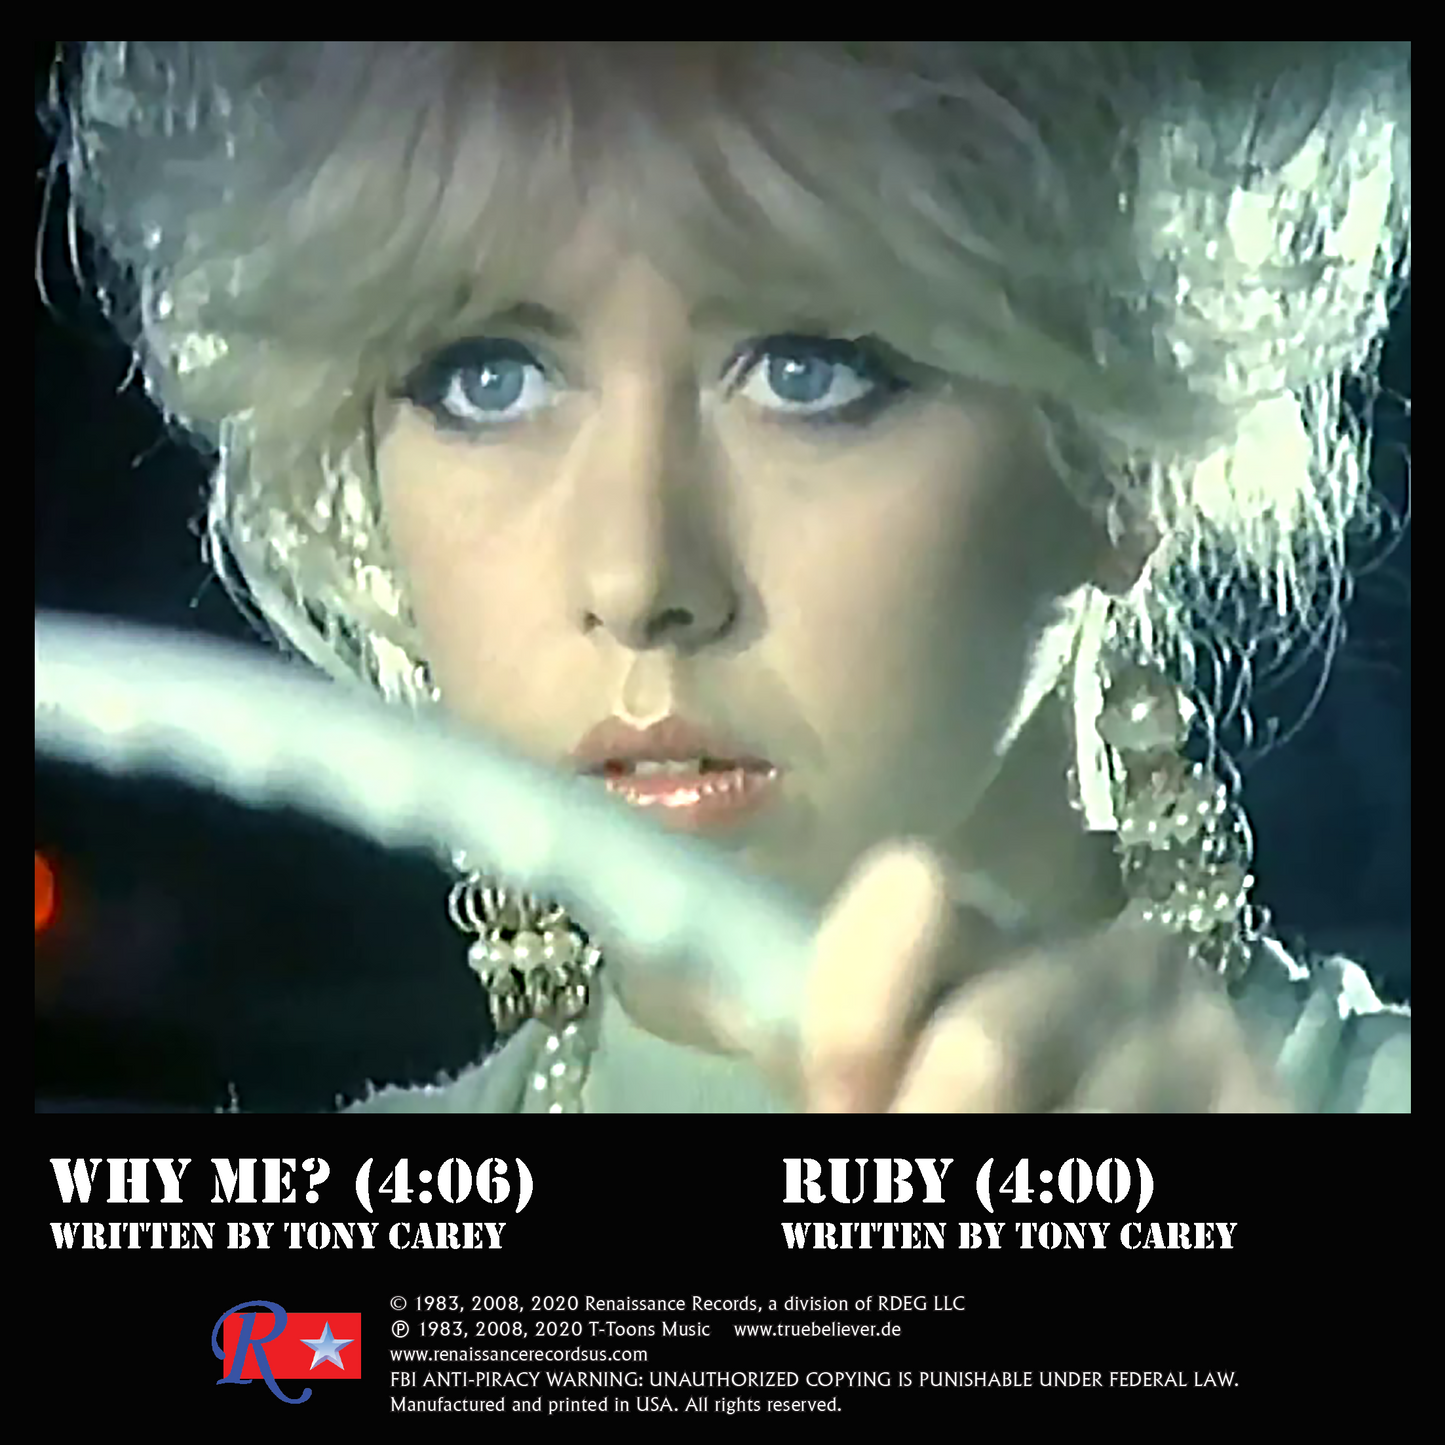 Planet P Project - Why Me? / Ruby (45RPM 7") [LP]